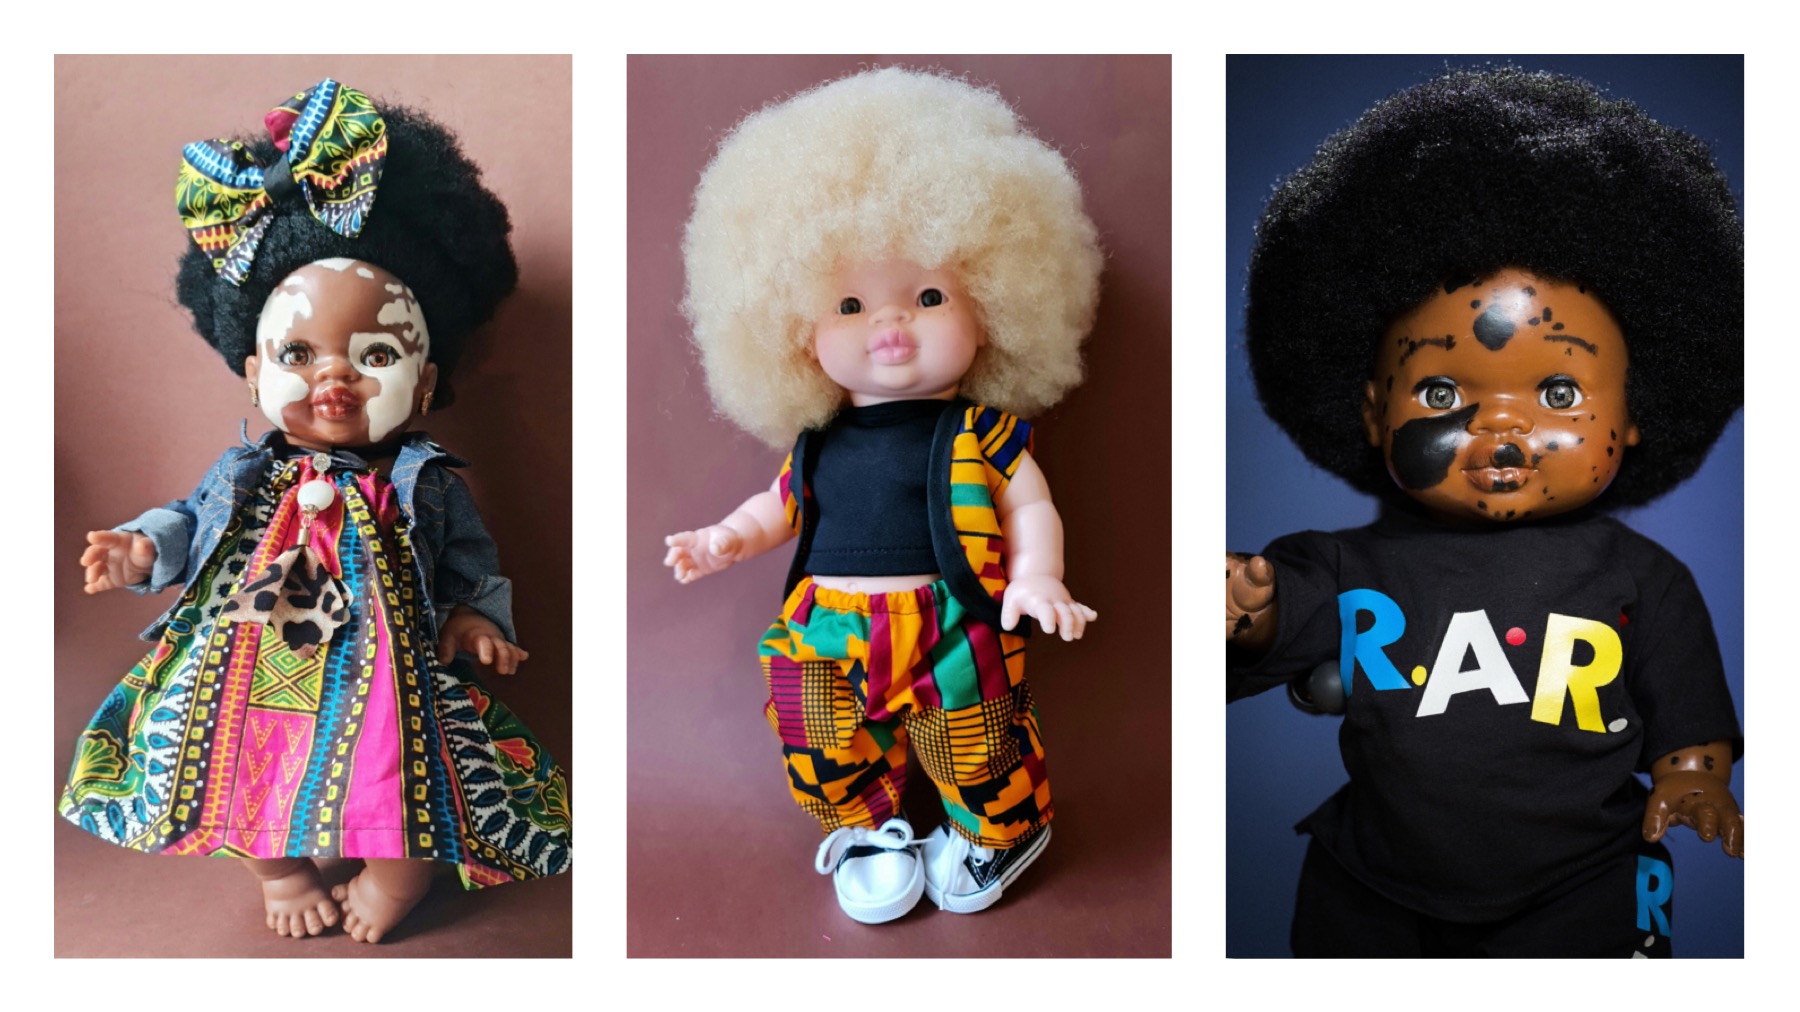 Skin pigmentation condition, or other  limitations are a speciality — ”Selah” is one of the dolls with vitiligo. ”Zavayo” is one of the dolls with albinism. “Christopher” has Nevus. Original handmade customised dolls with differend skinconditions to bring diversity into children's lives.